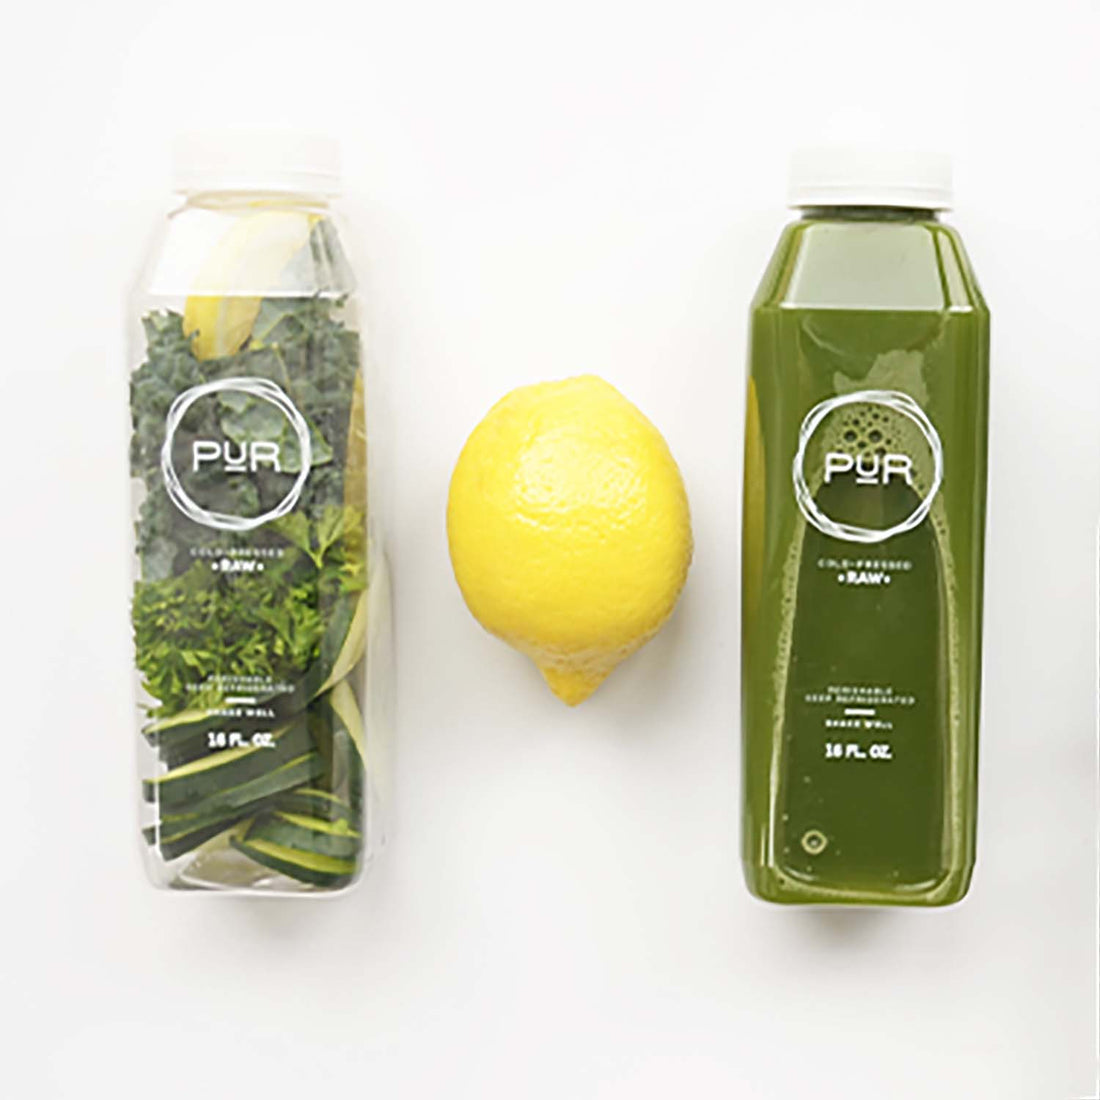 Juice Cleanse Instructions For Beginners - PUR Cold Pressed Juice